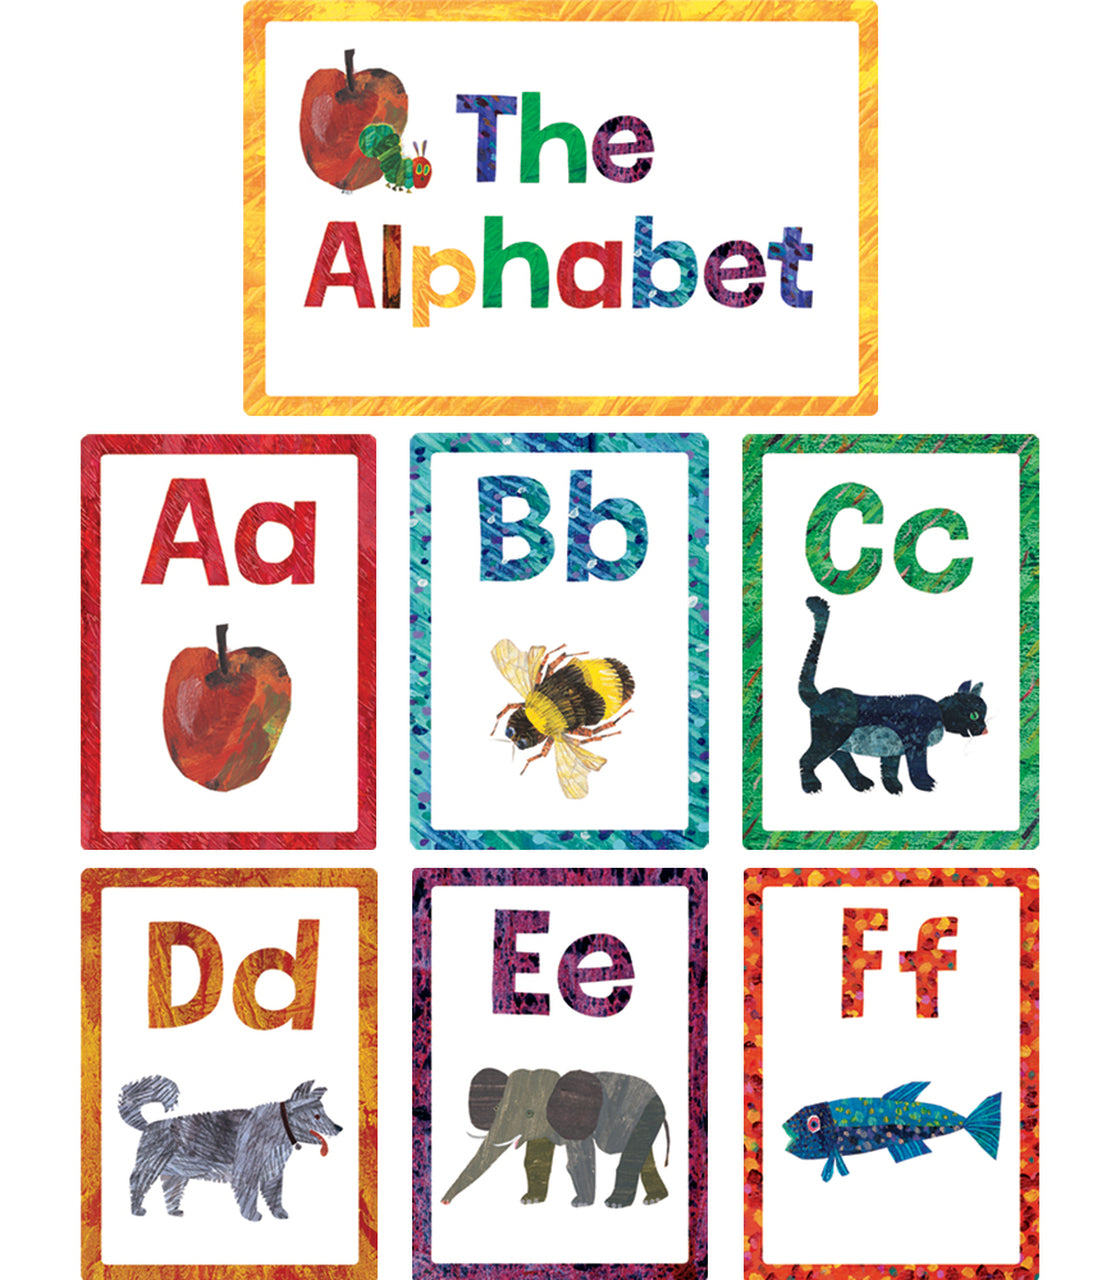 Eric Carle Inspired Classroom - Alphabet Cards with Pictures